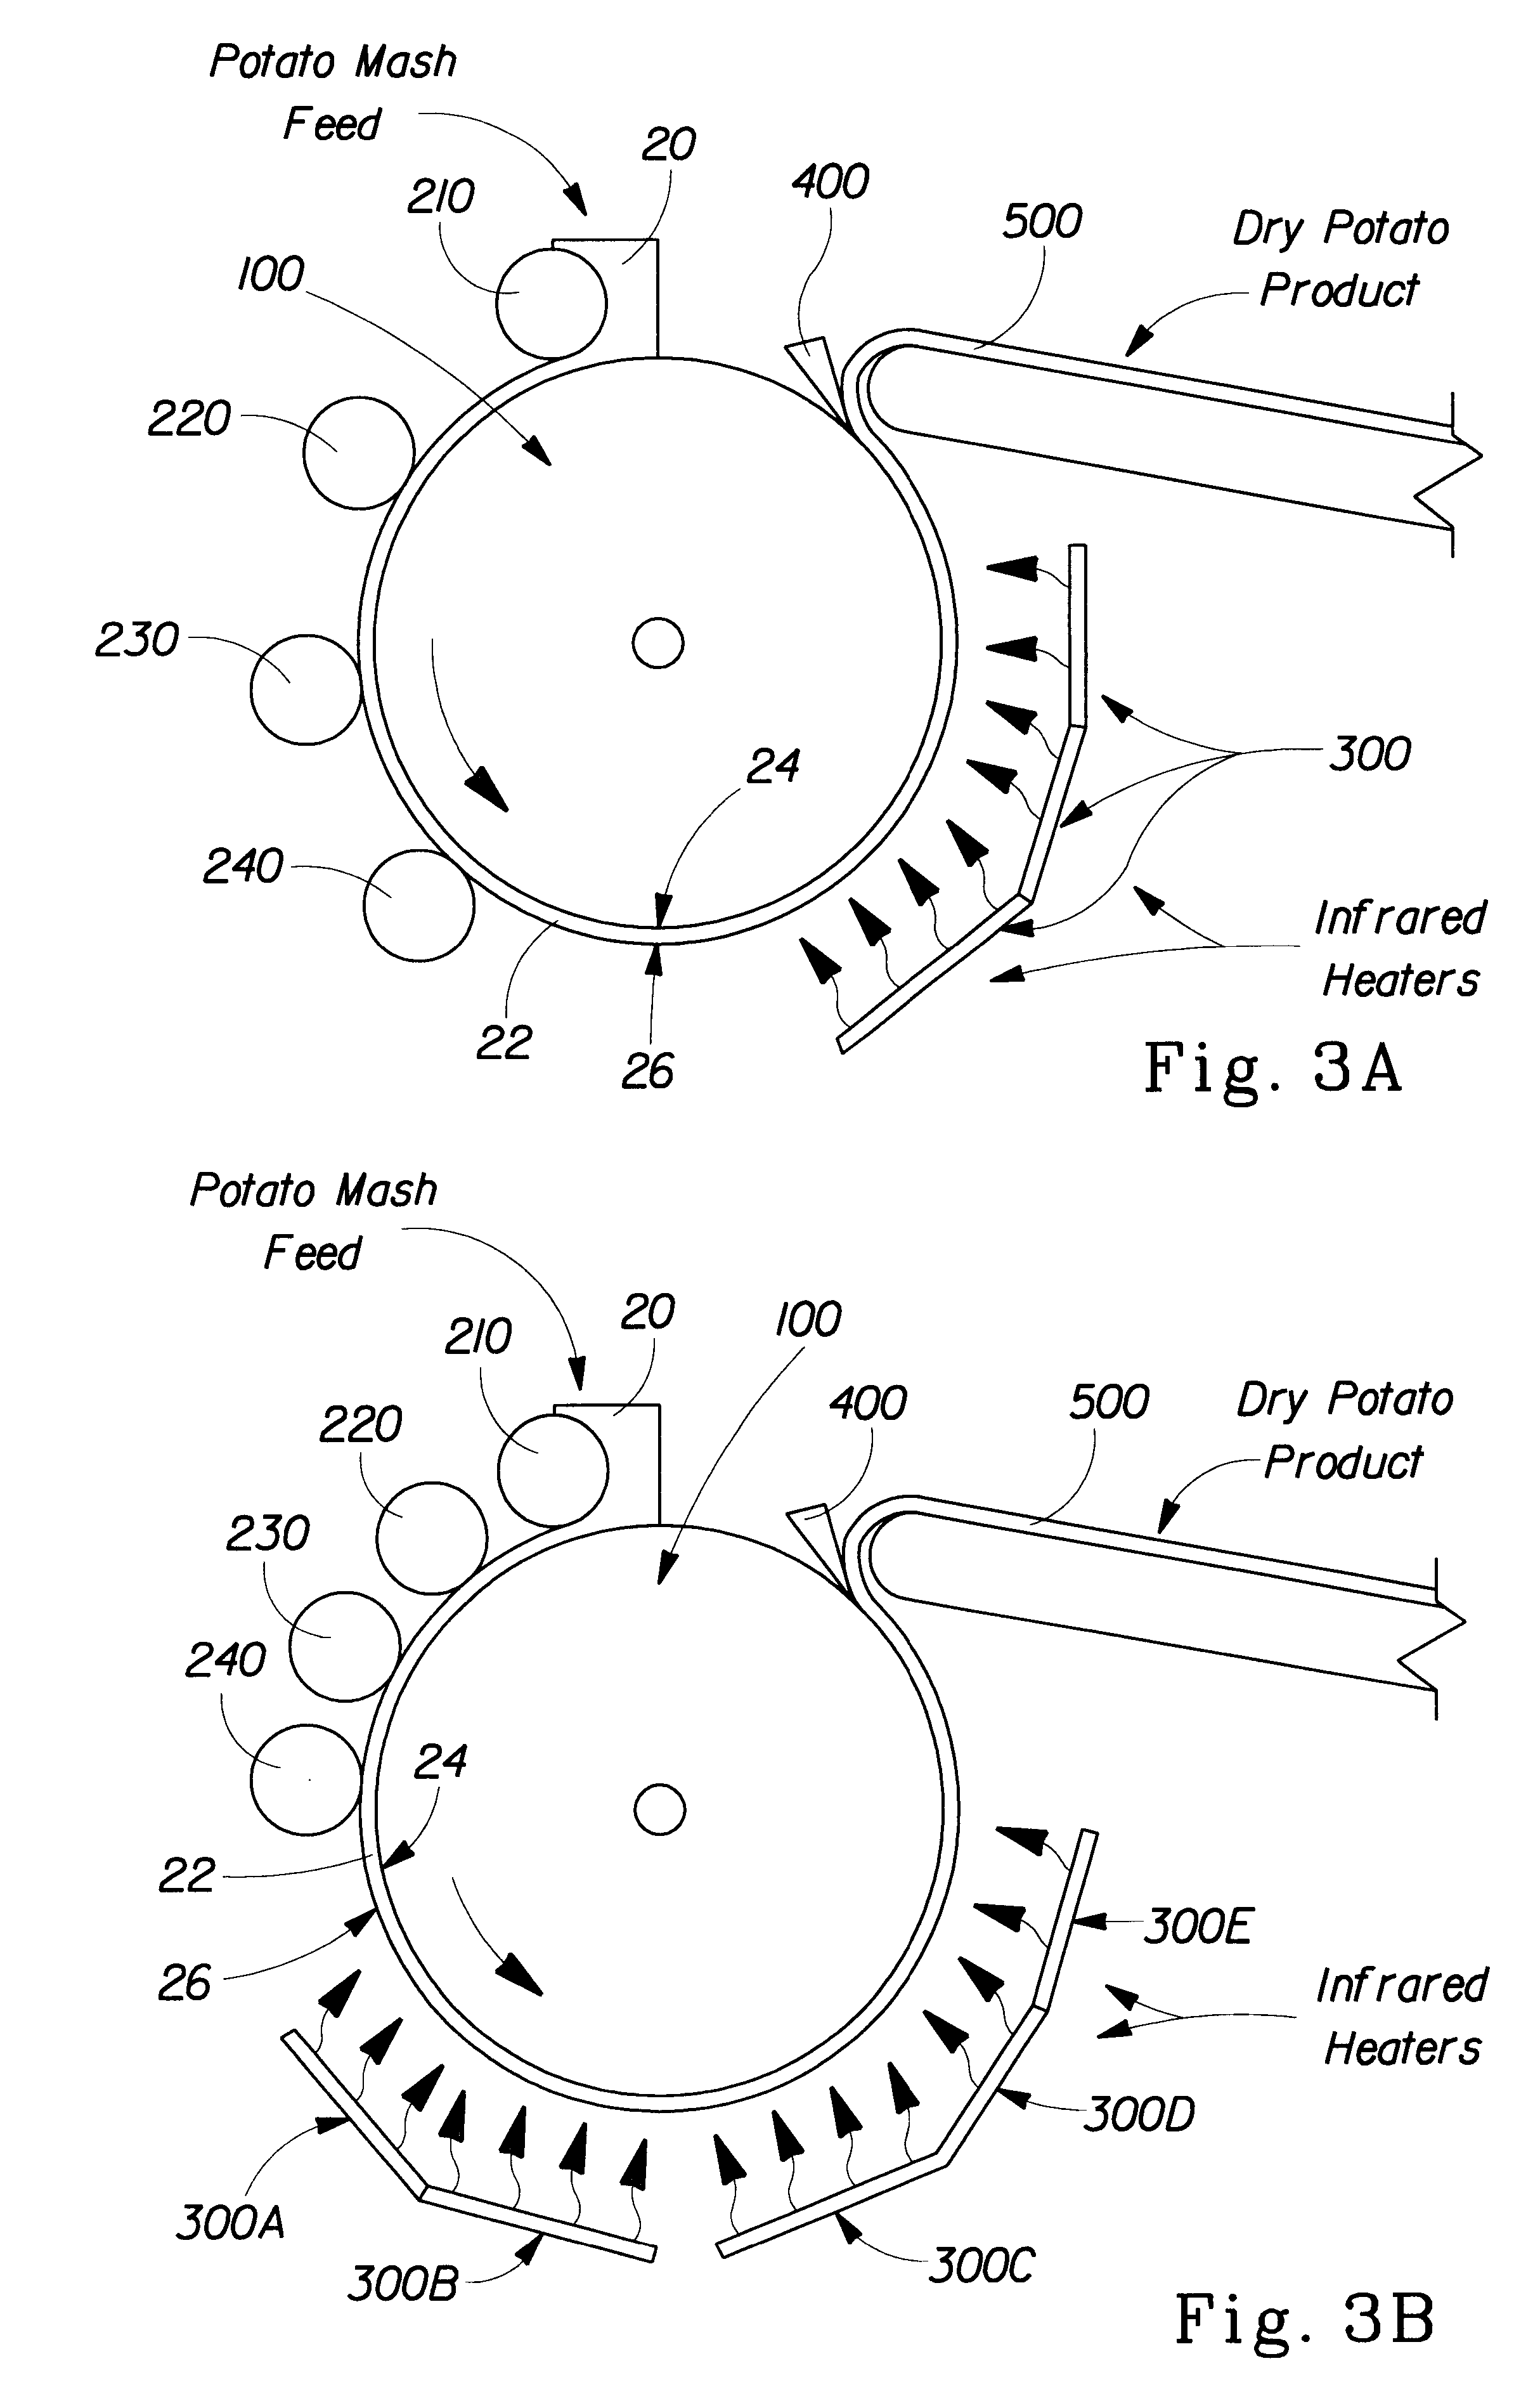 Method for preparing dehydrated starch products